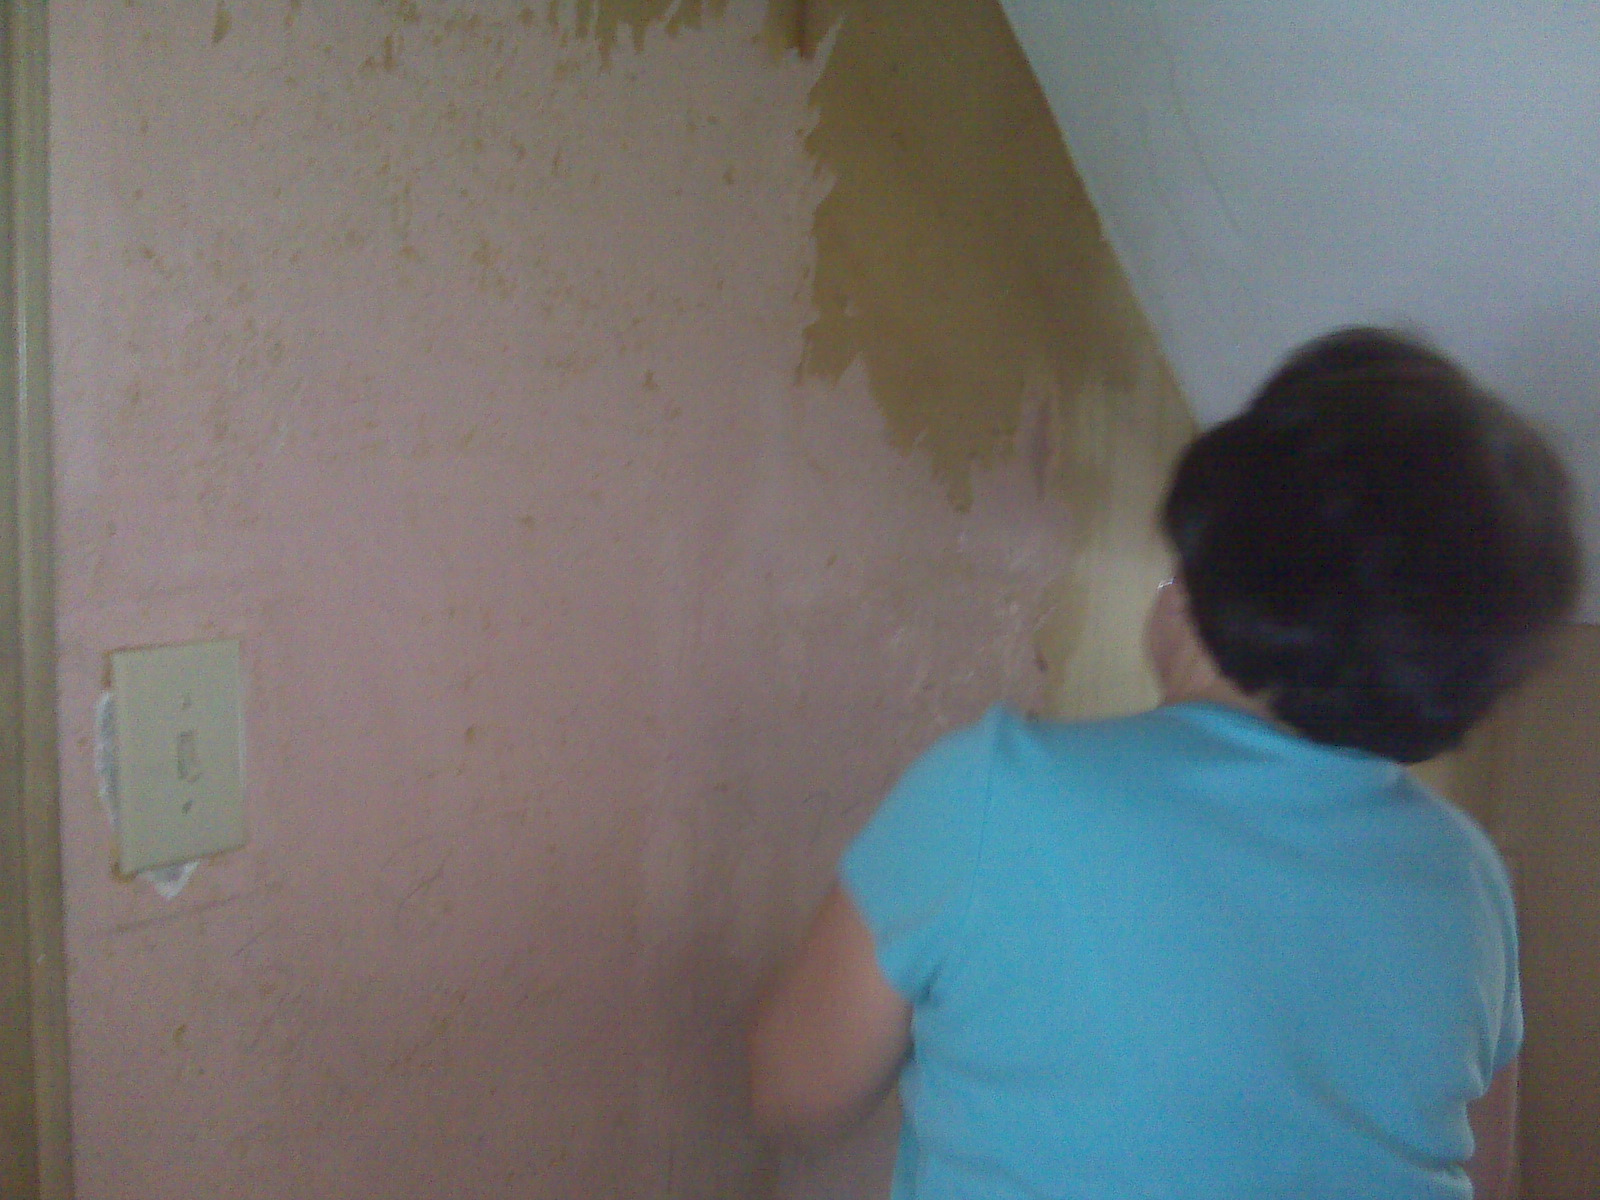 ... can see, there are nice pink-painted walls underneath the paste